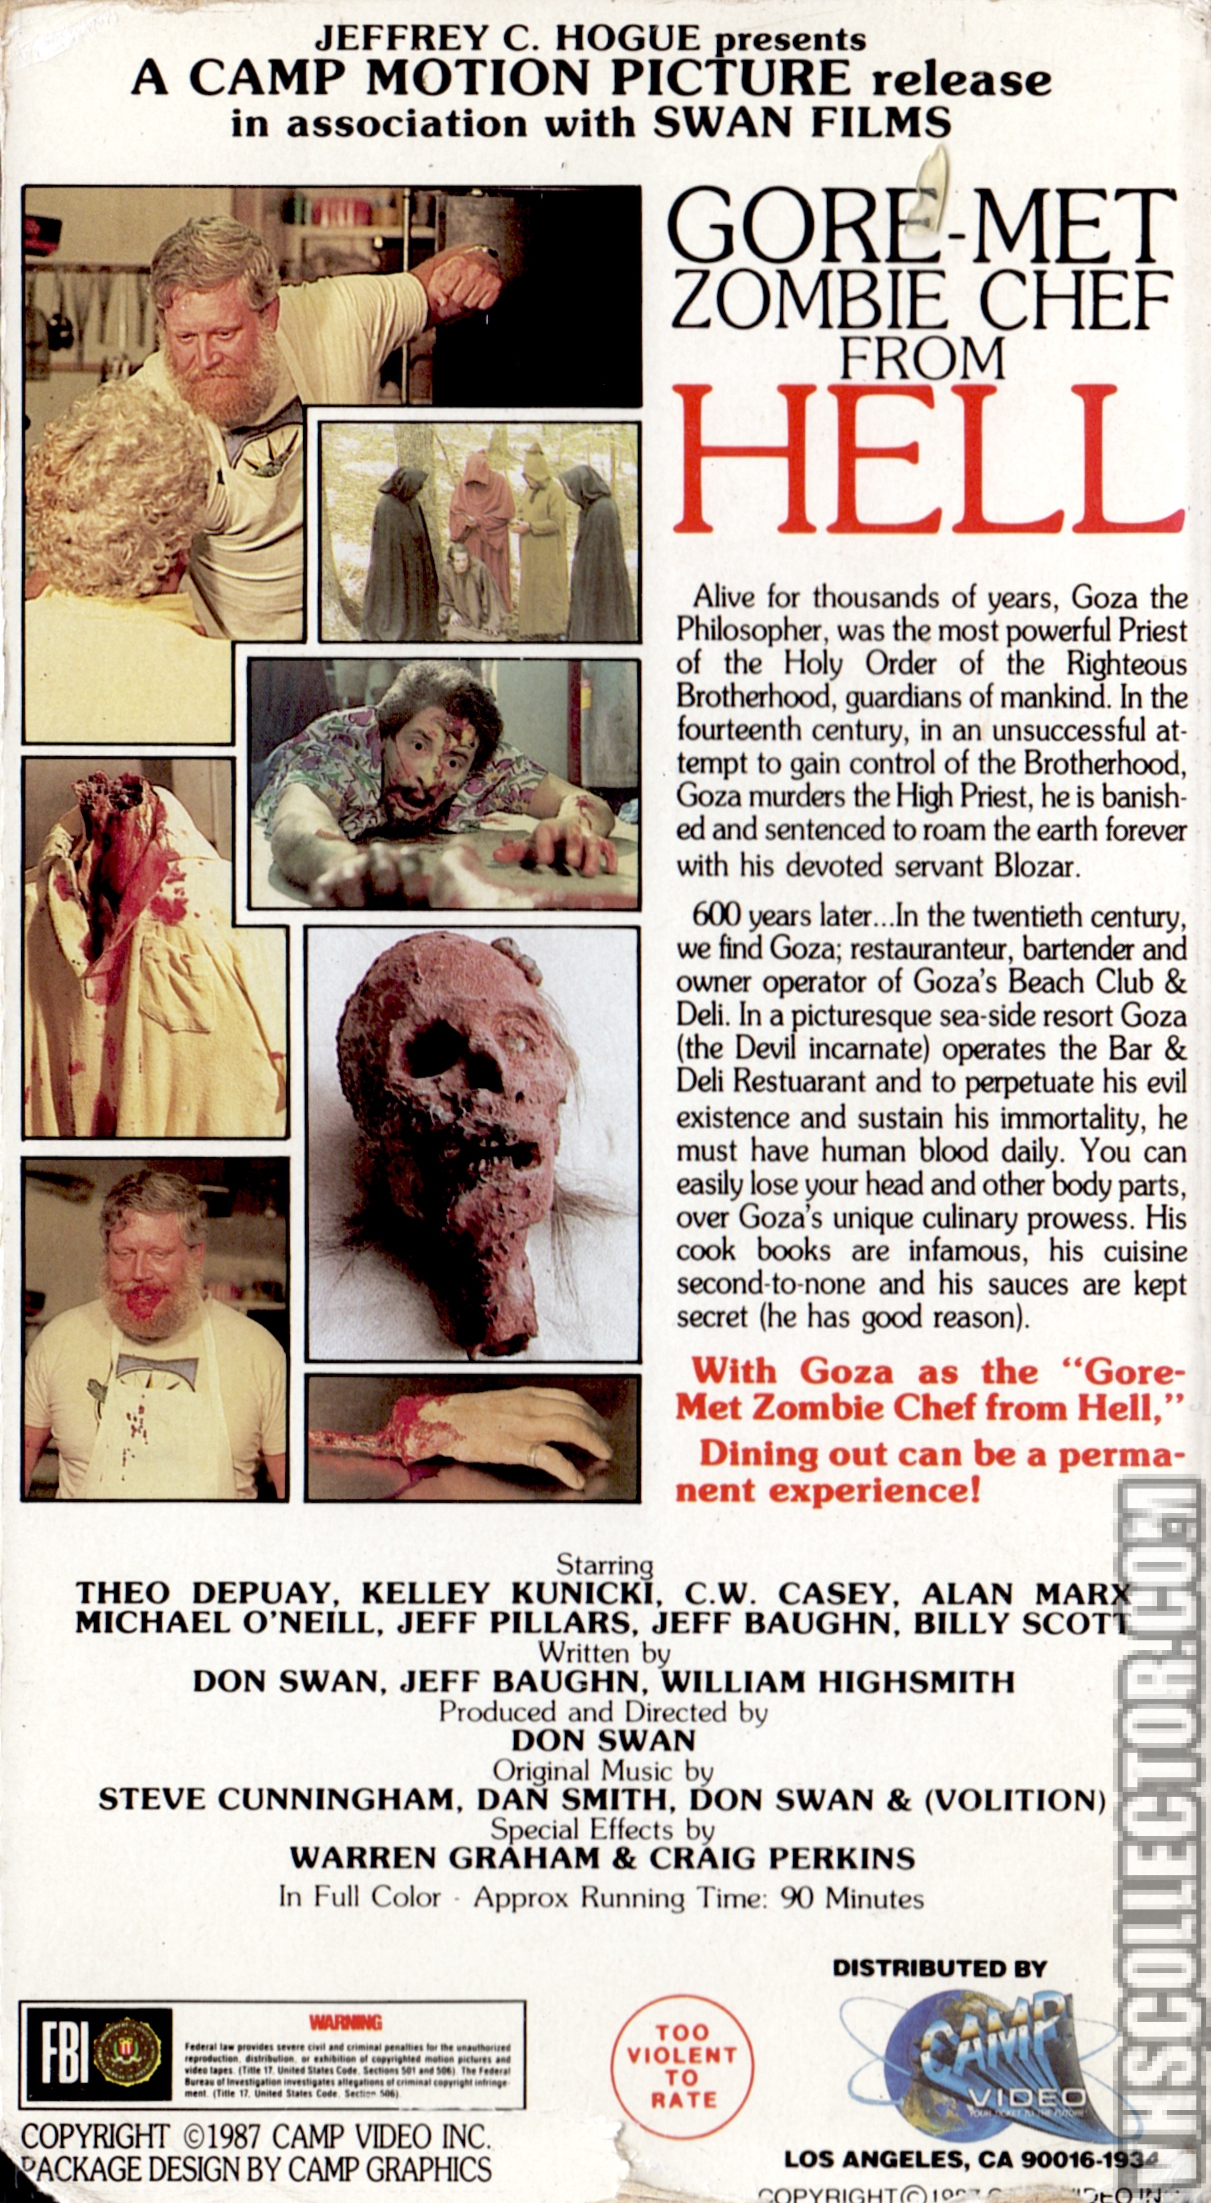 Gore-Met Zombie Chef From Hell | VHSCollector.com